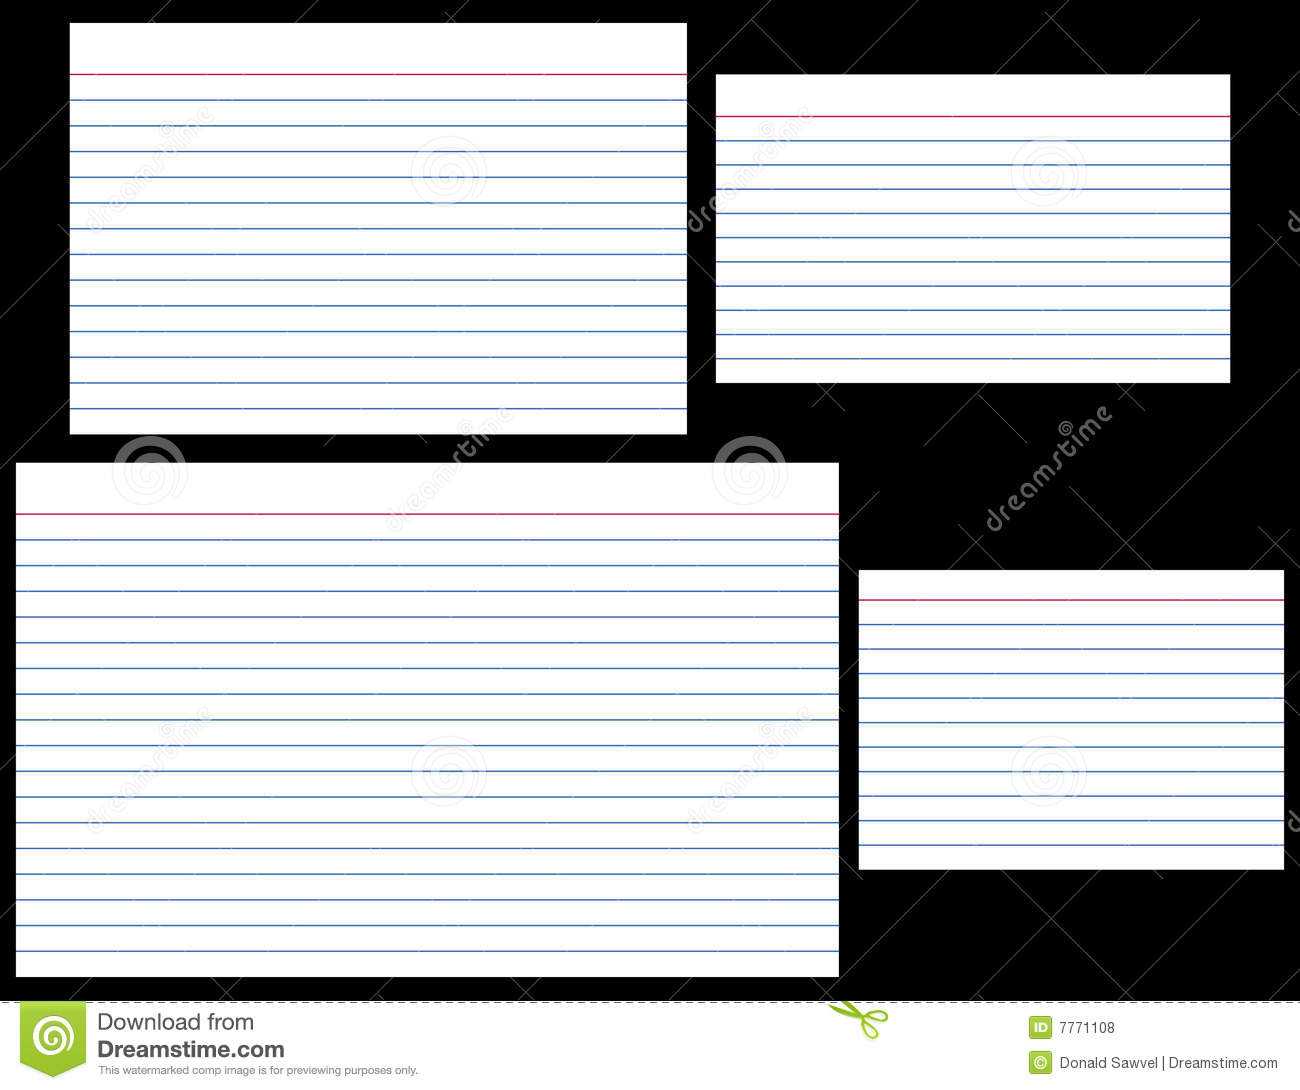 Index Cards Stock Vector. Illustration Of Stationery, Lined Throughout 5 By 8 Index Card Template